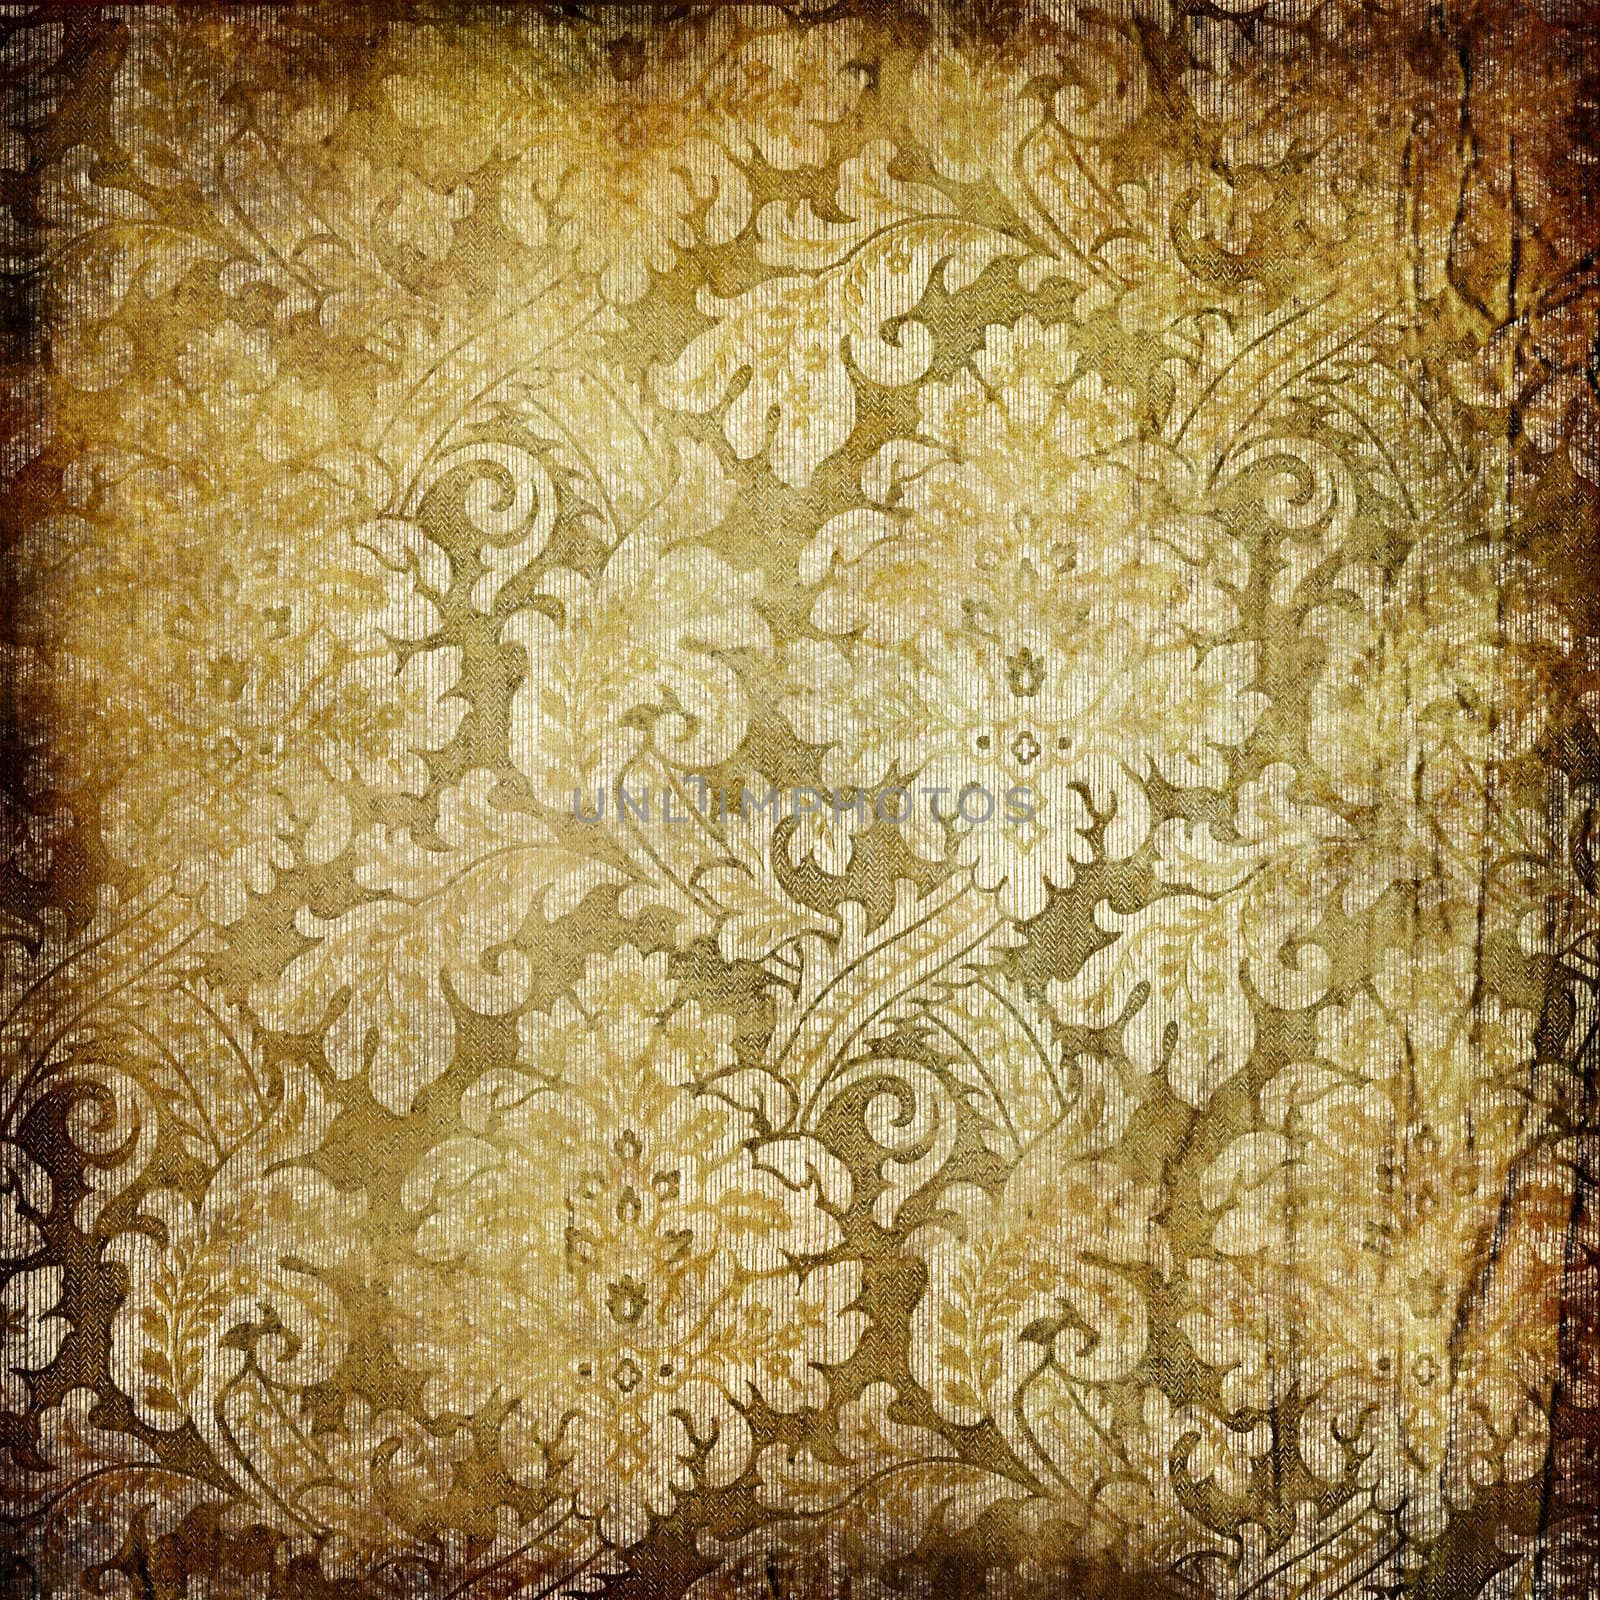 old background with classy patterns